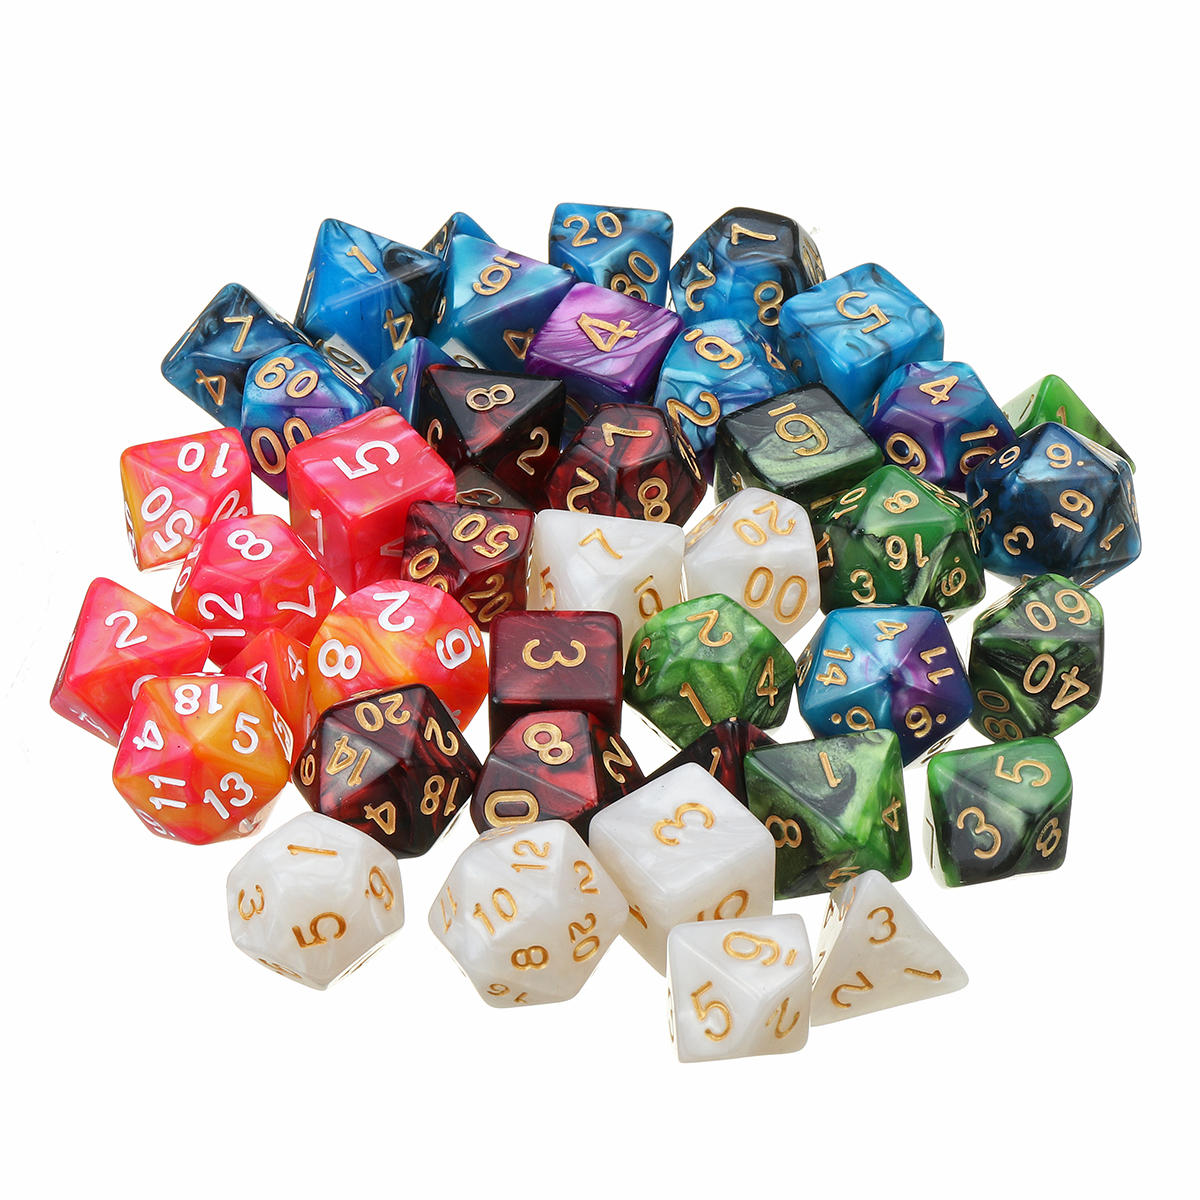 42pcs/Set Acrylic Polyhedral Dice Bag for DND RPG MTG Role Playing Board Game 